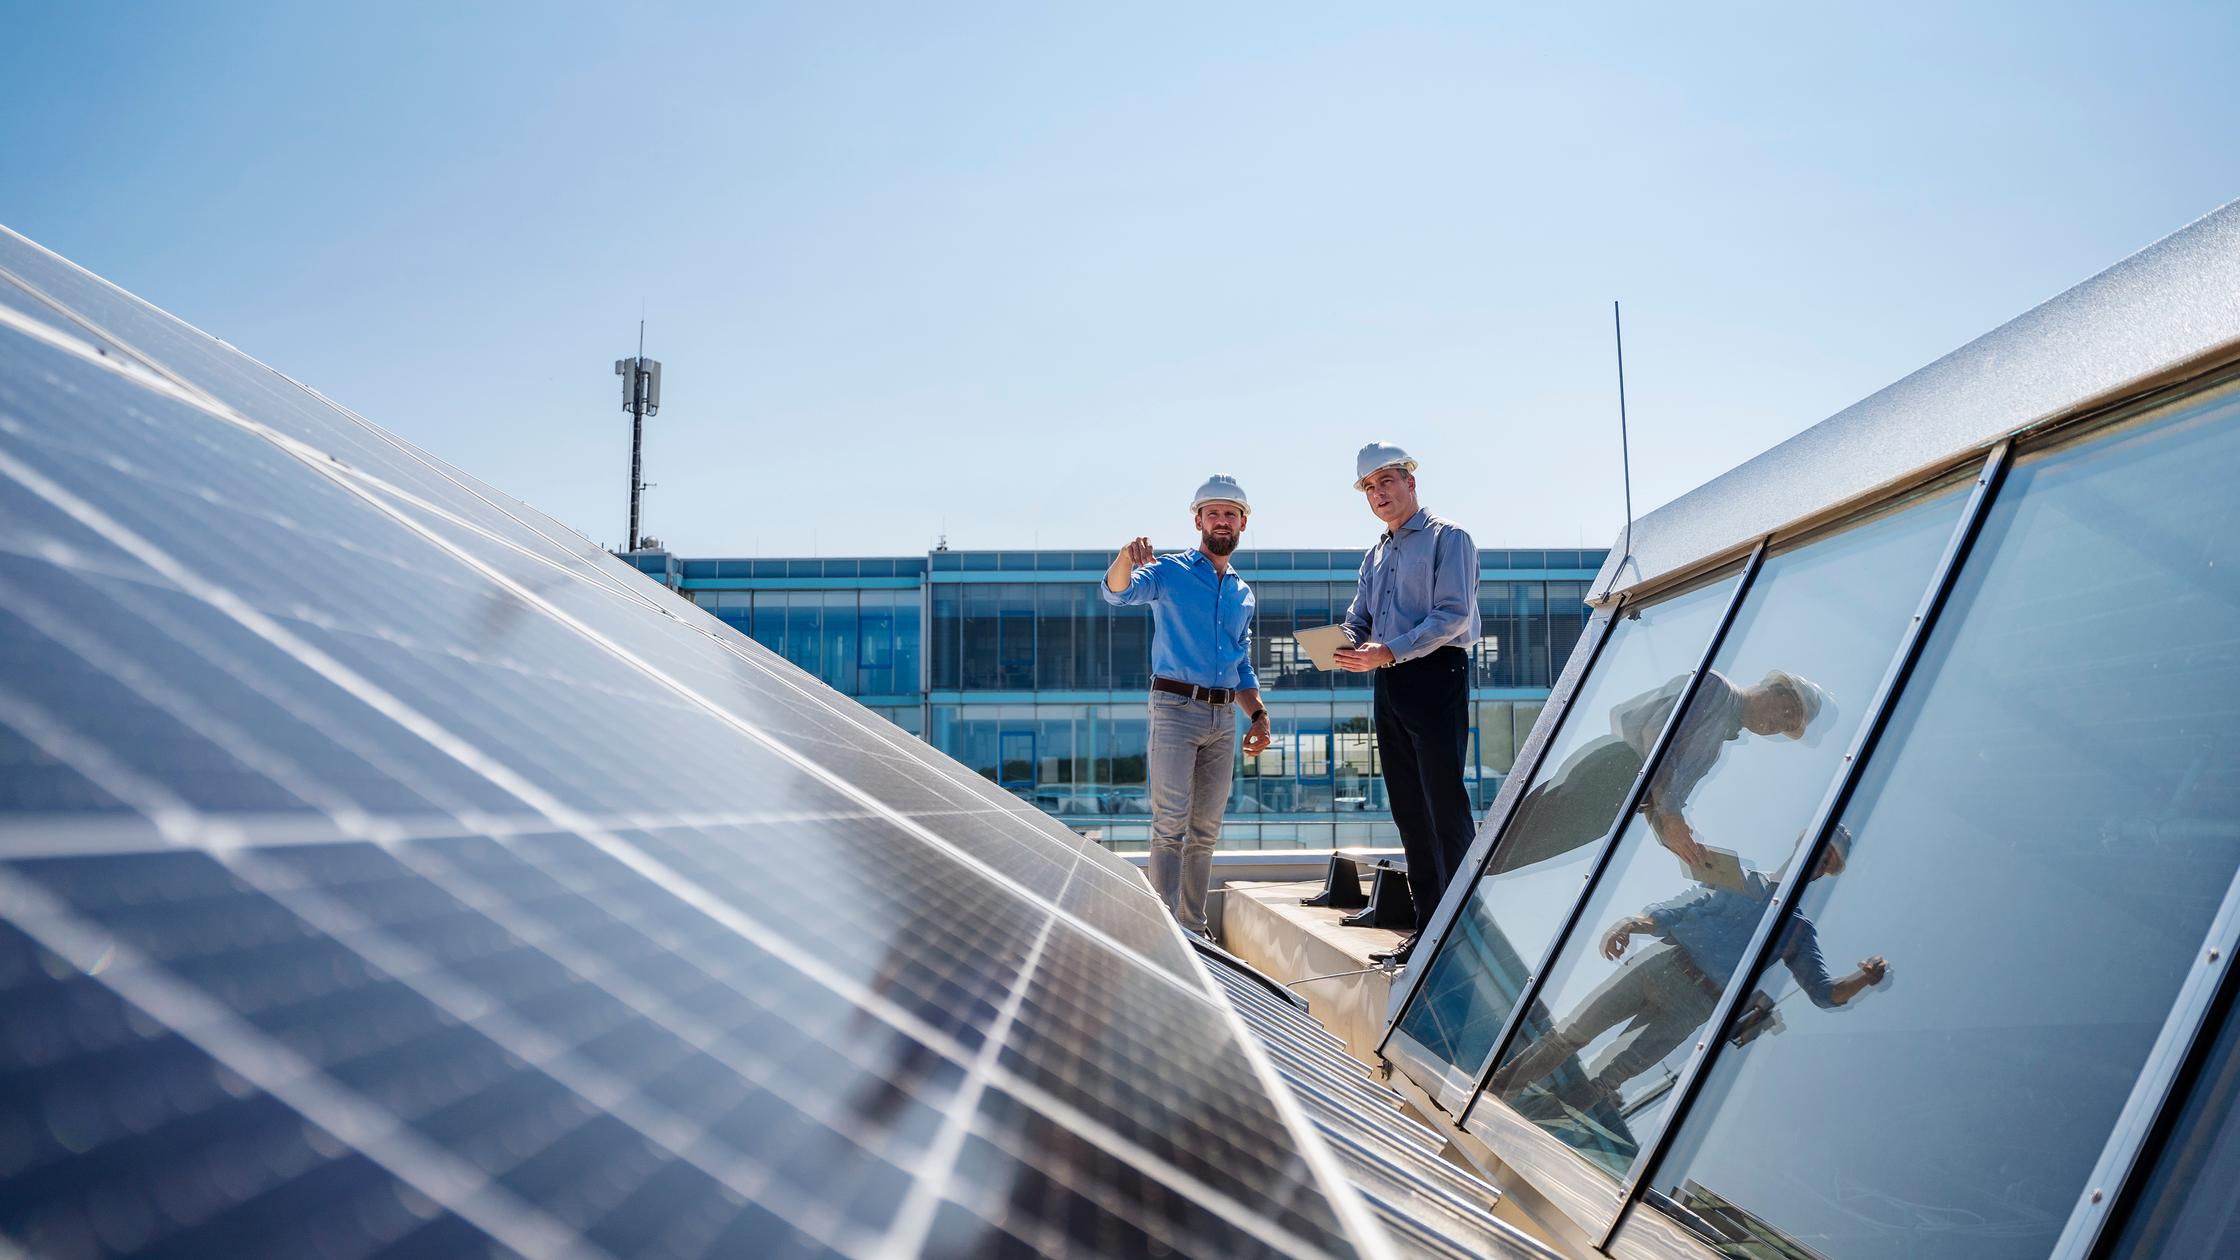 Two businessmen in hard hats meeting on the roof of a company building with solar panels